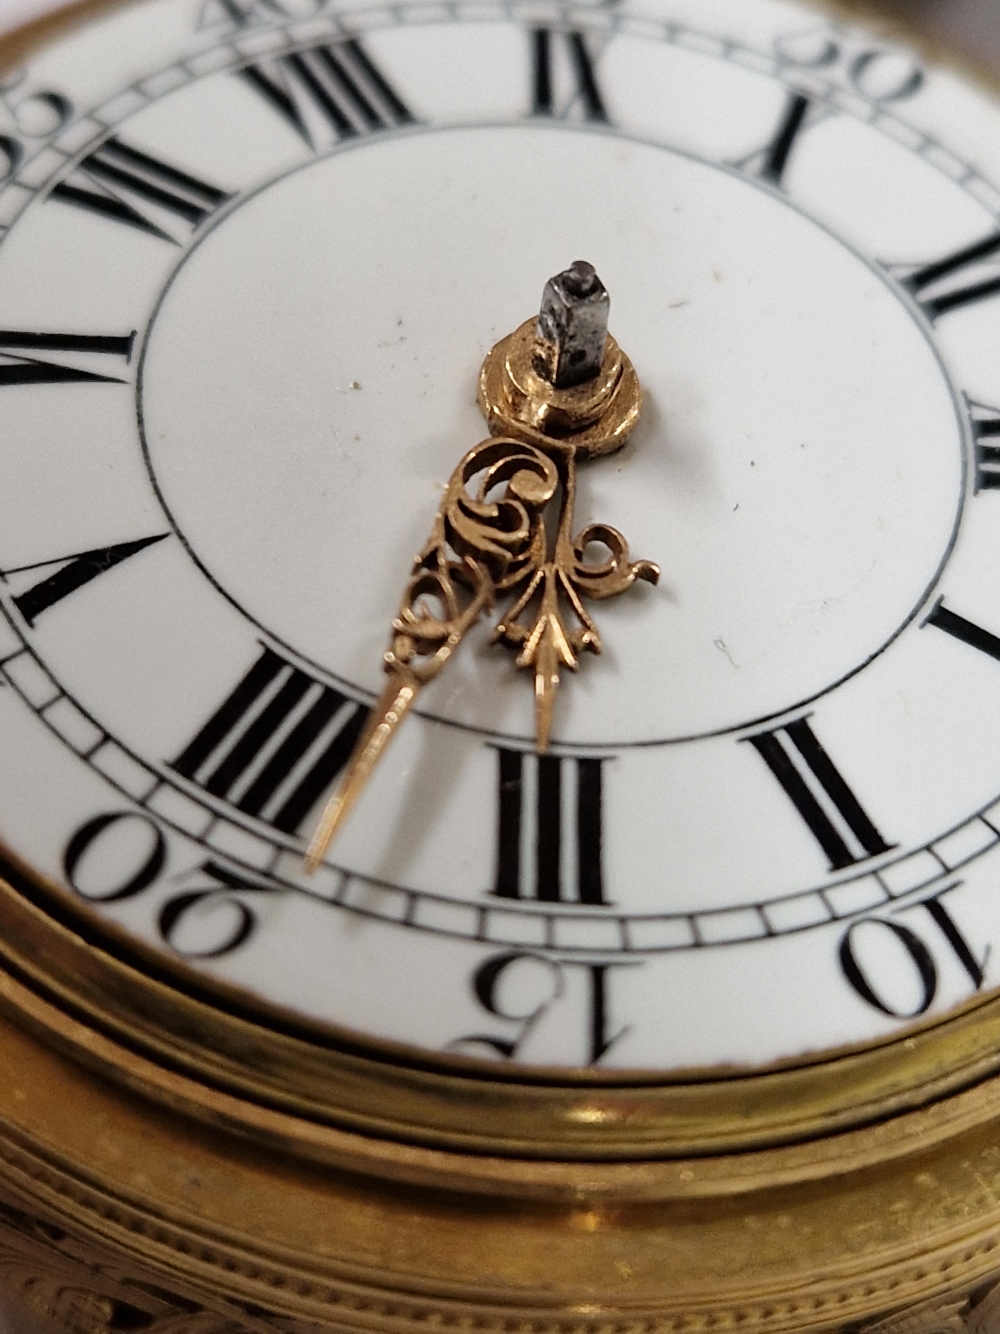 AN ANTIQUE GOLD PAIR CASED POCKET WATCH, SIGNED BONLY LONDON, (SIC) PROBABLY DEVERAUX BOWLEY, - Image 15 of 21